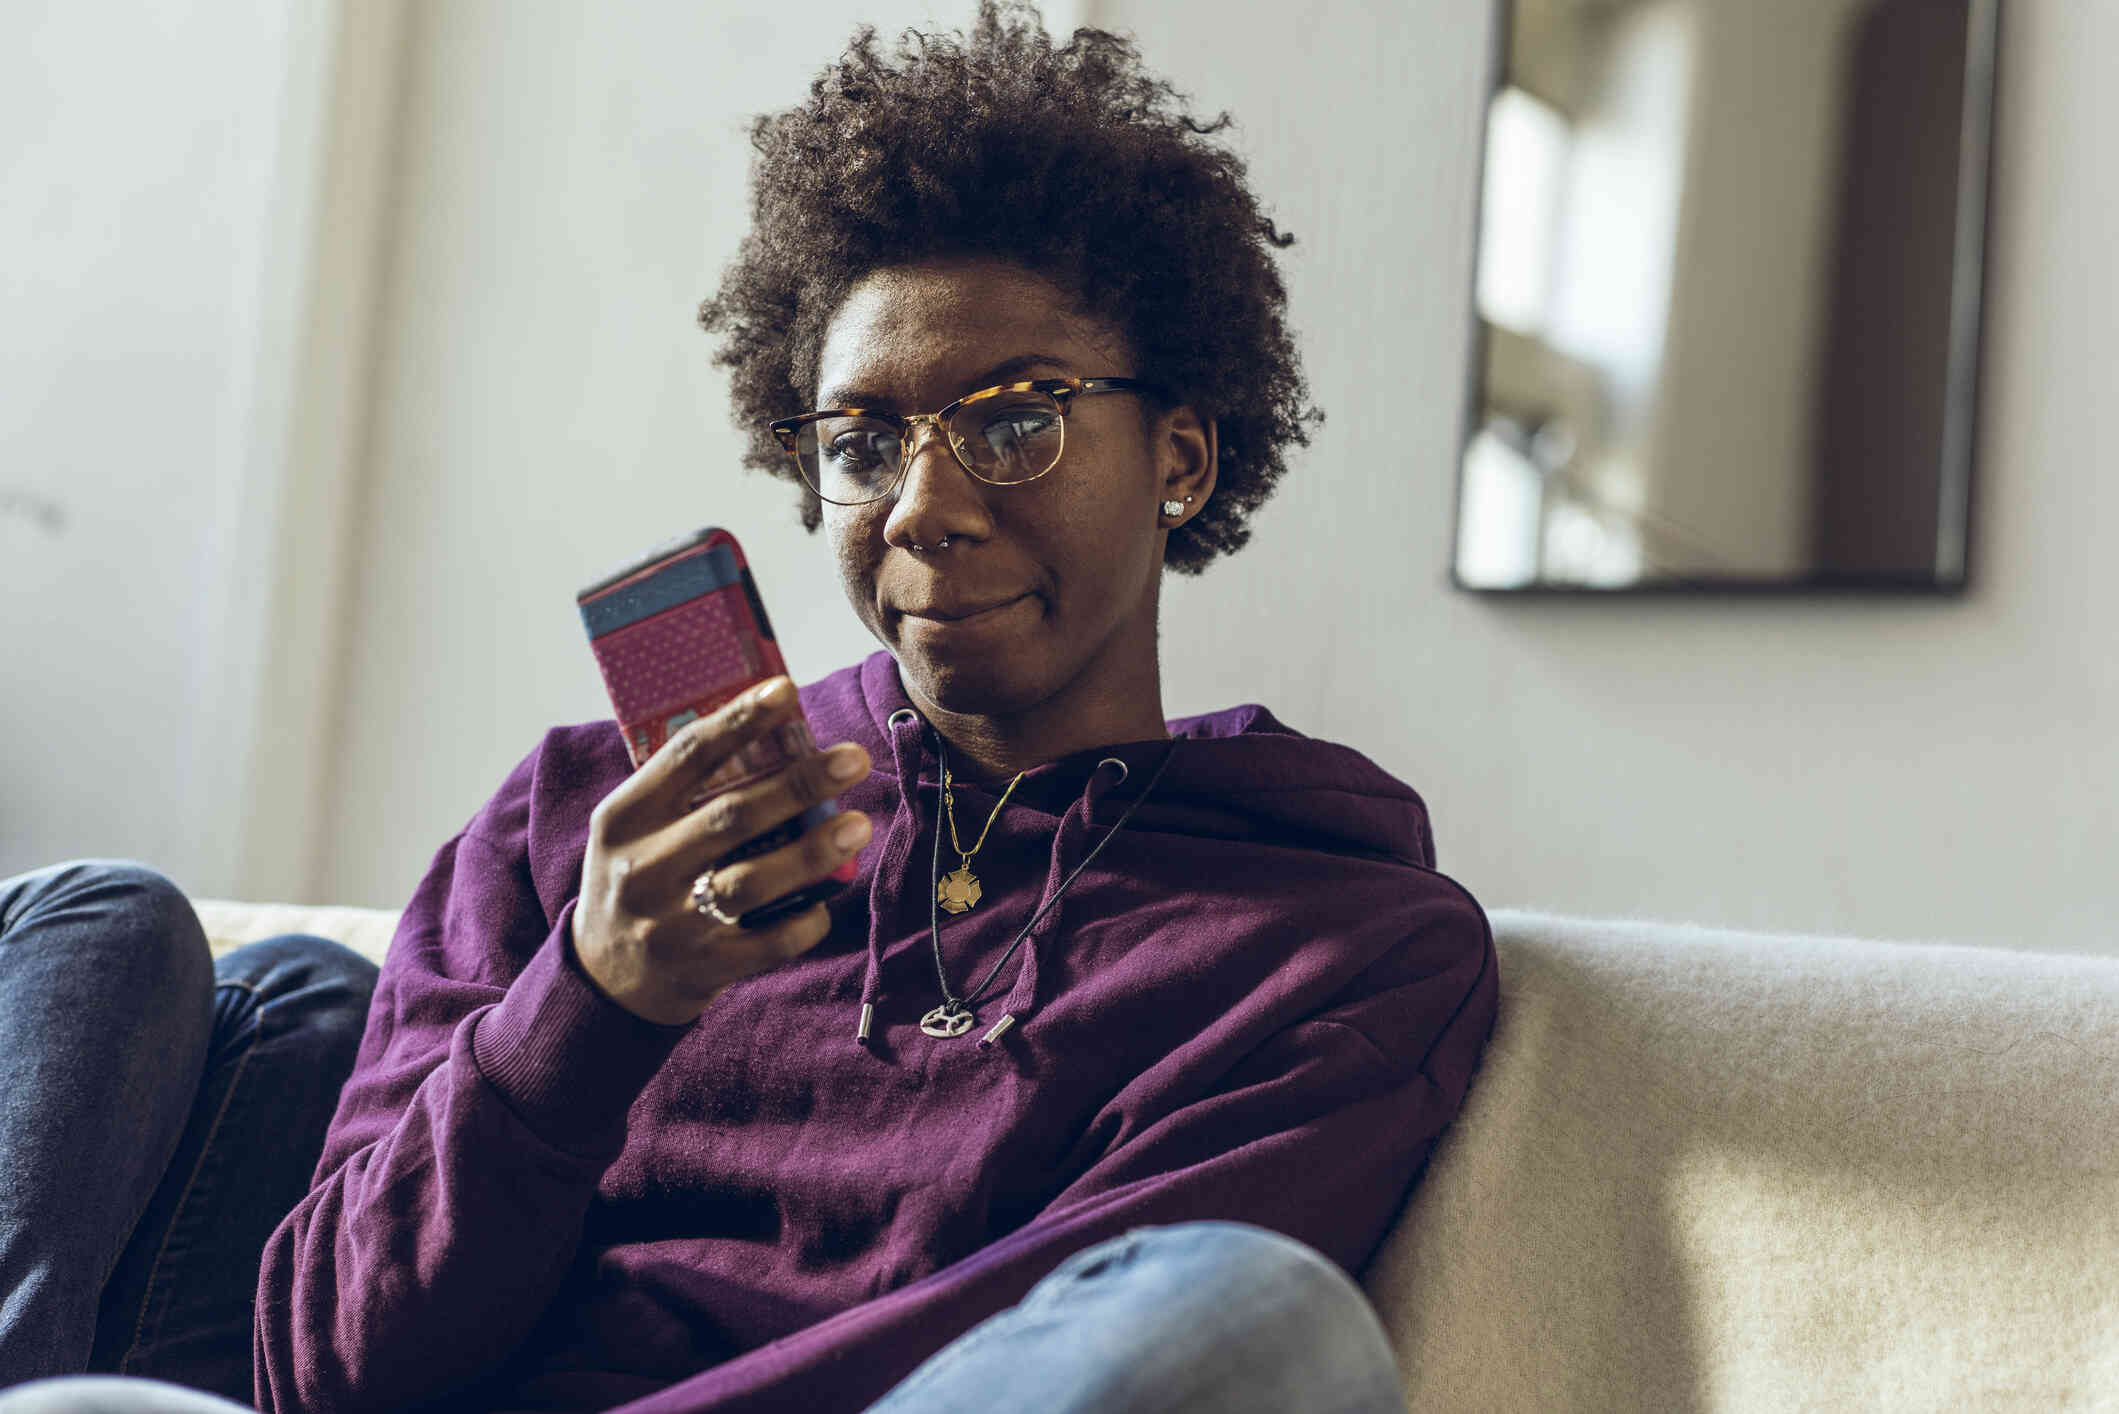 A woman in a purple sweater sits casually on the couch and looks at the cellphone in her hand.